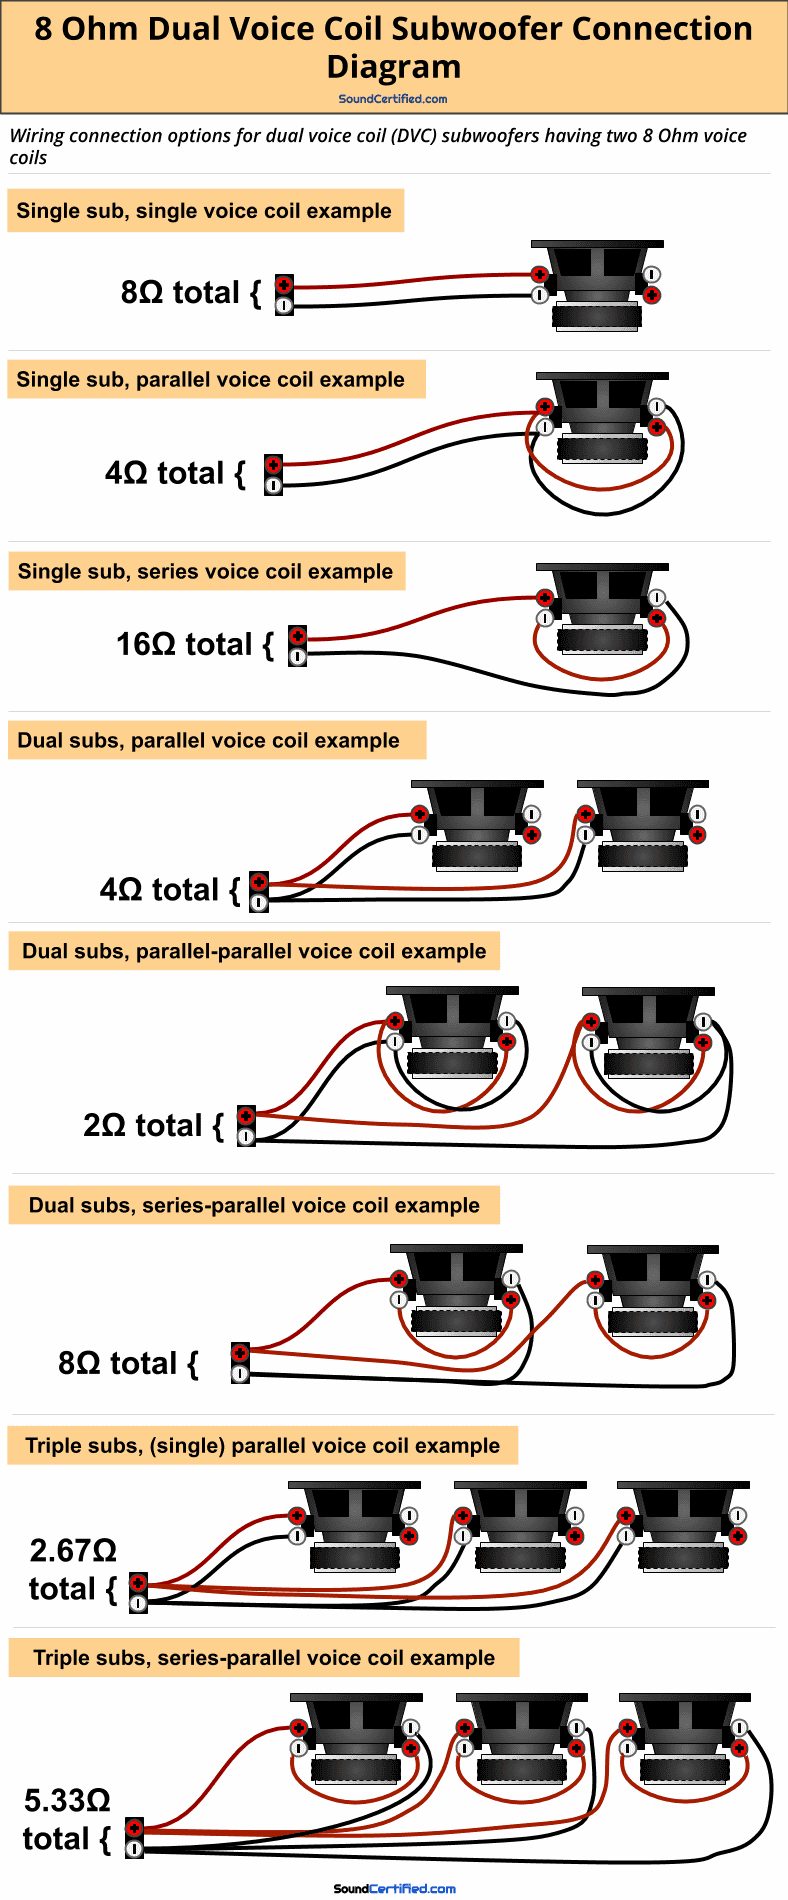 8 Ohm dual voice coil subwoofer wiring diagram